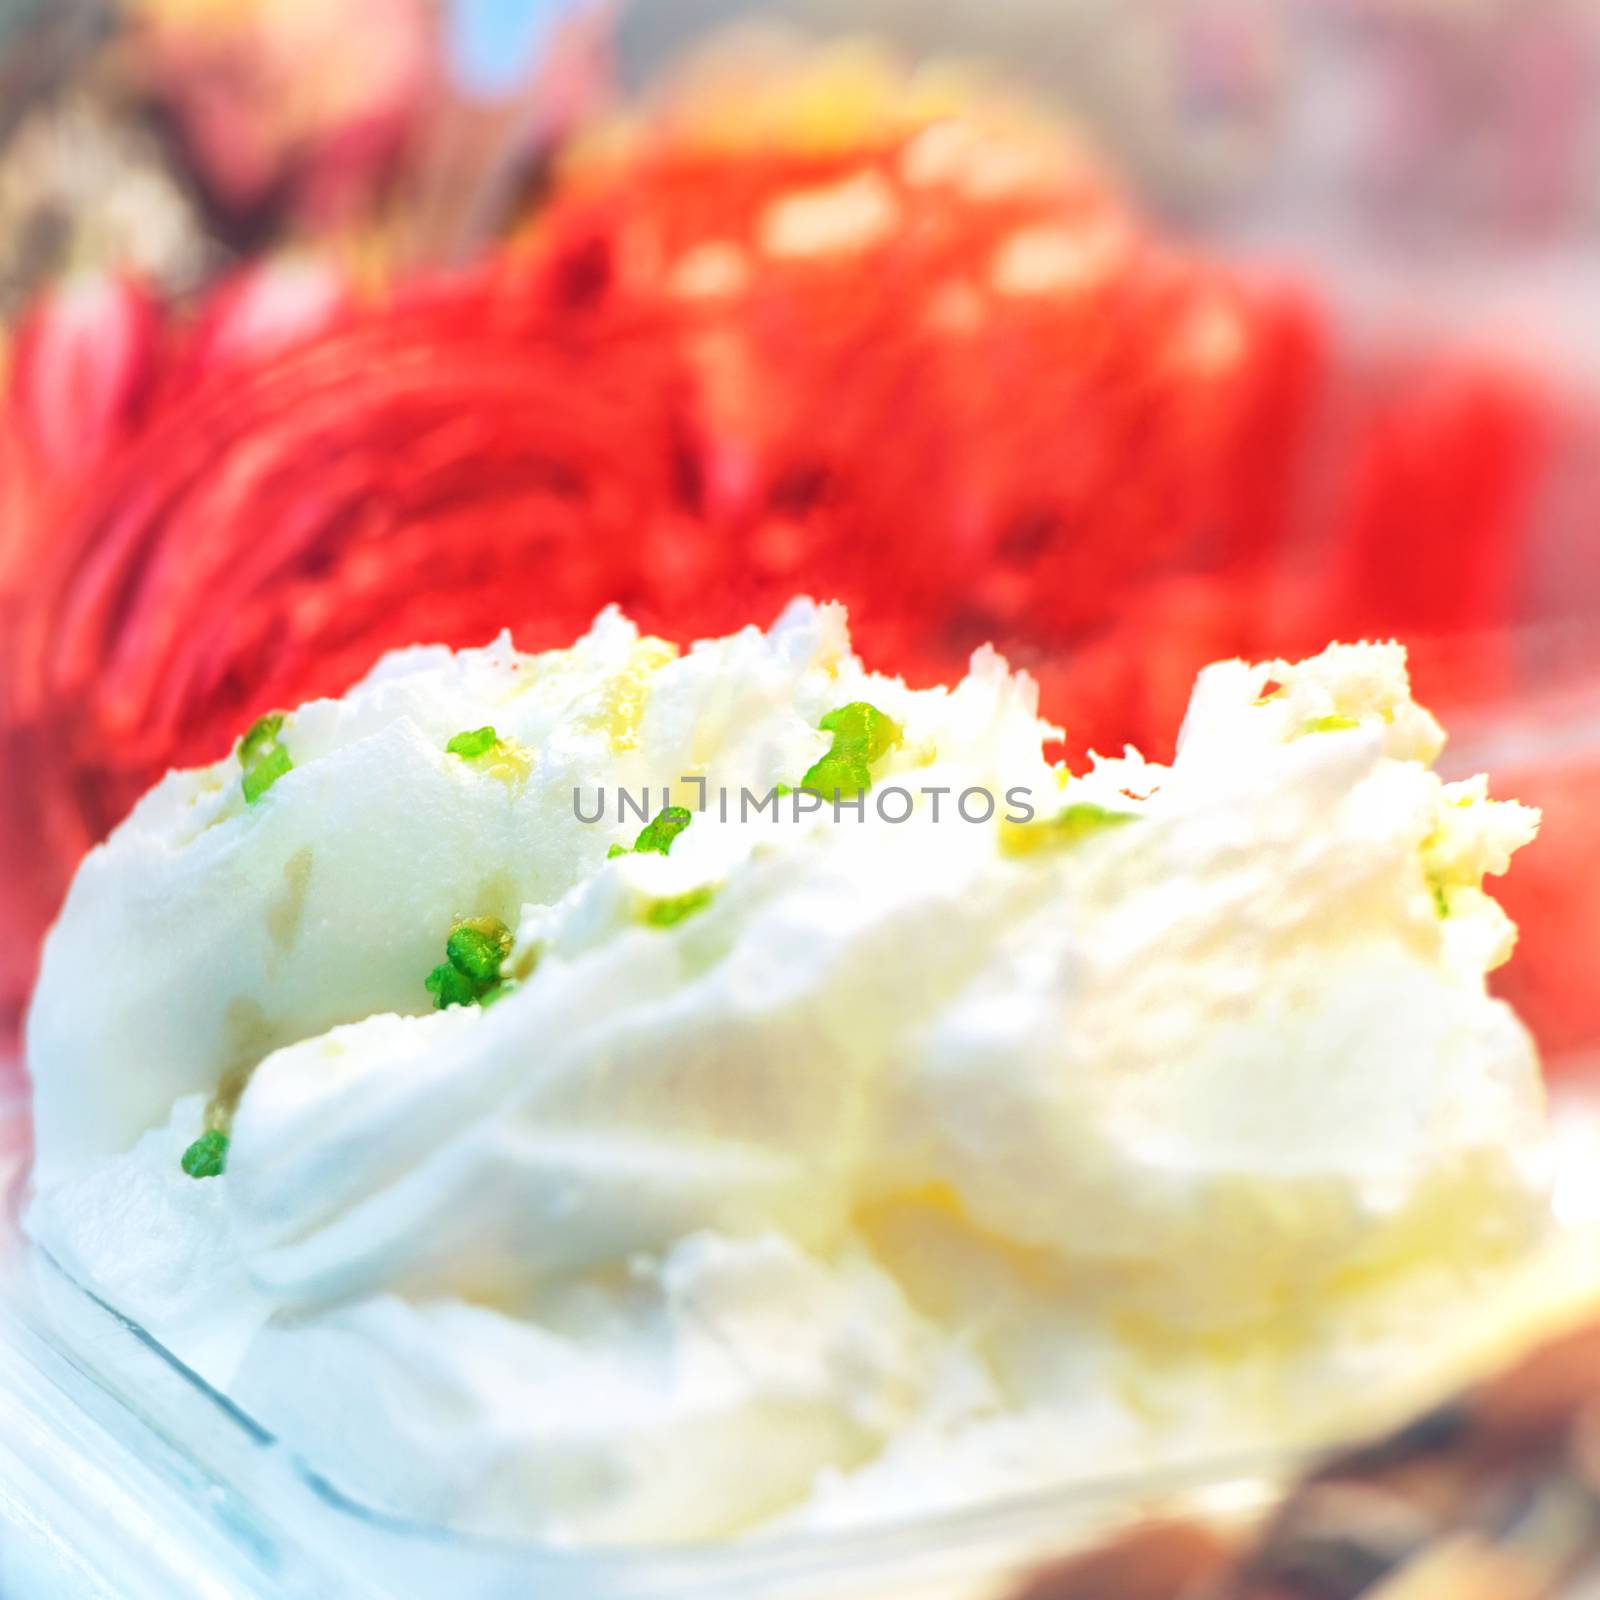 Delicious white and red ice cream gelato by vapi